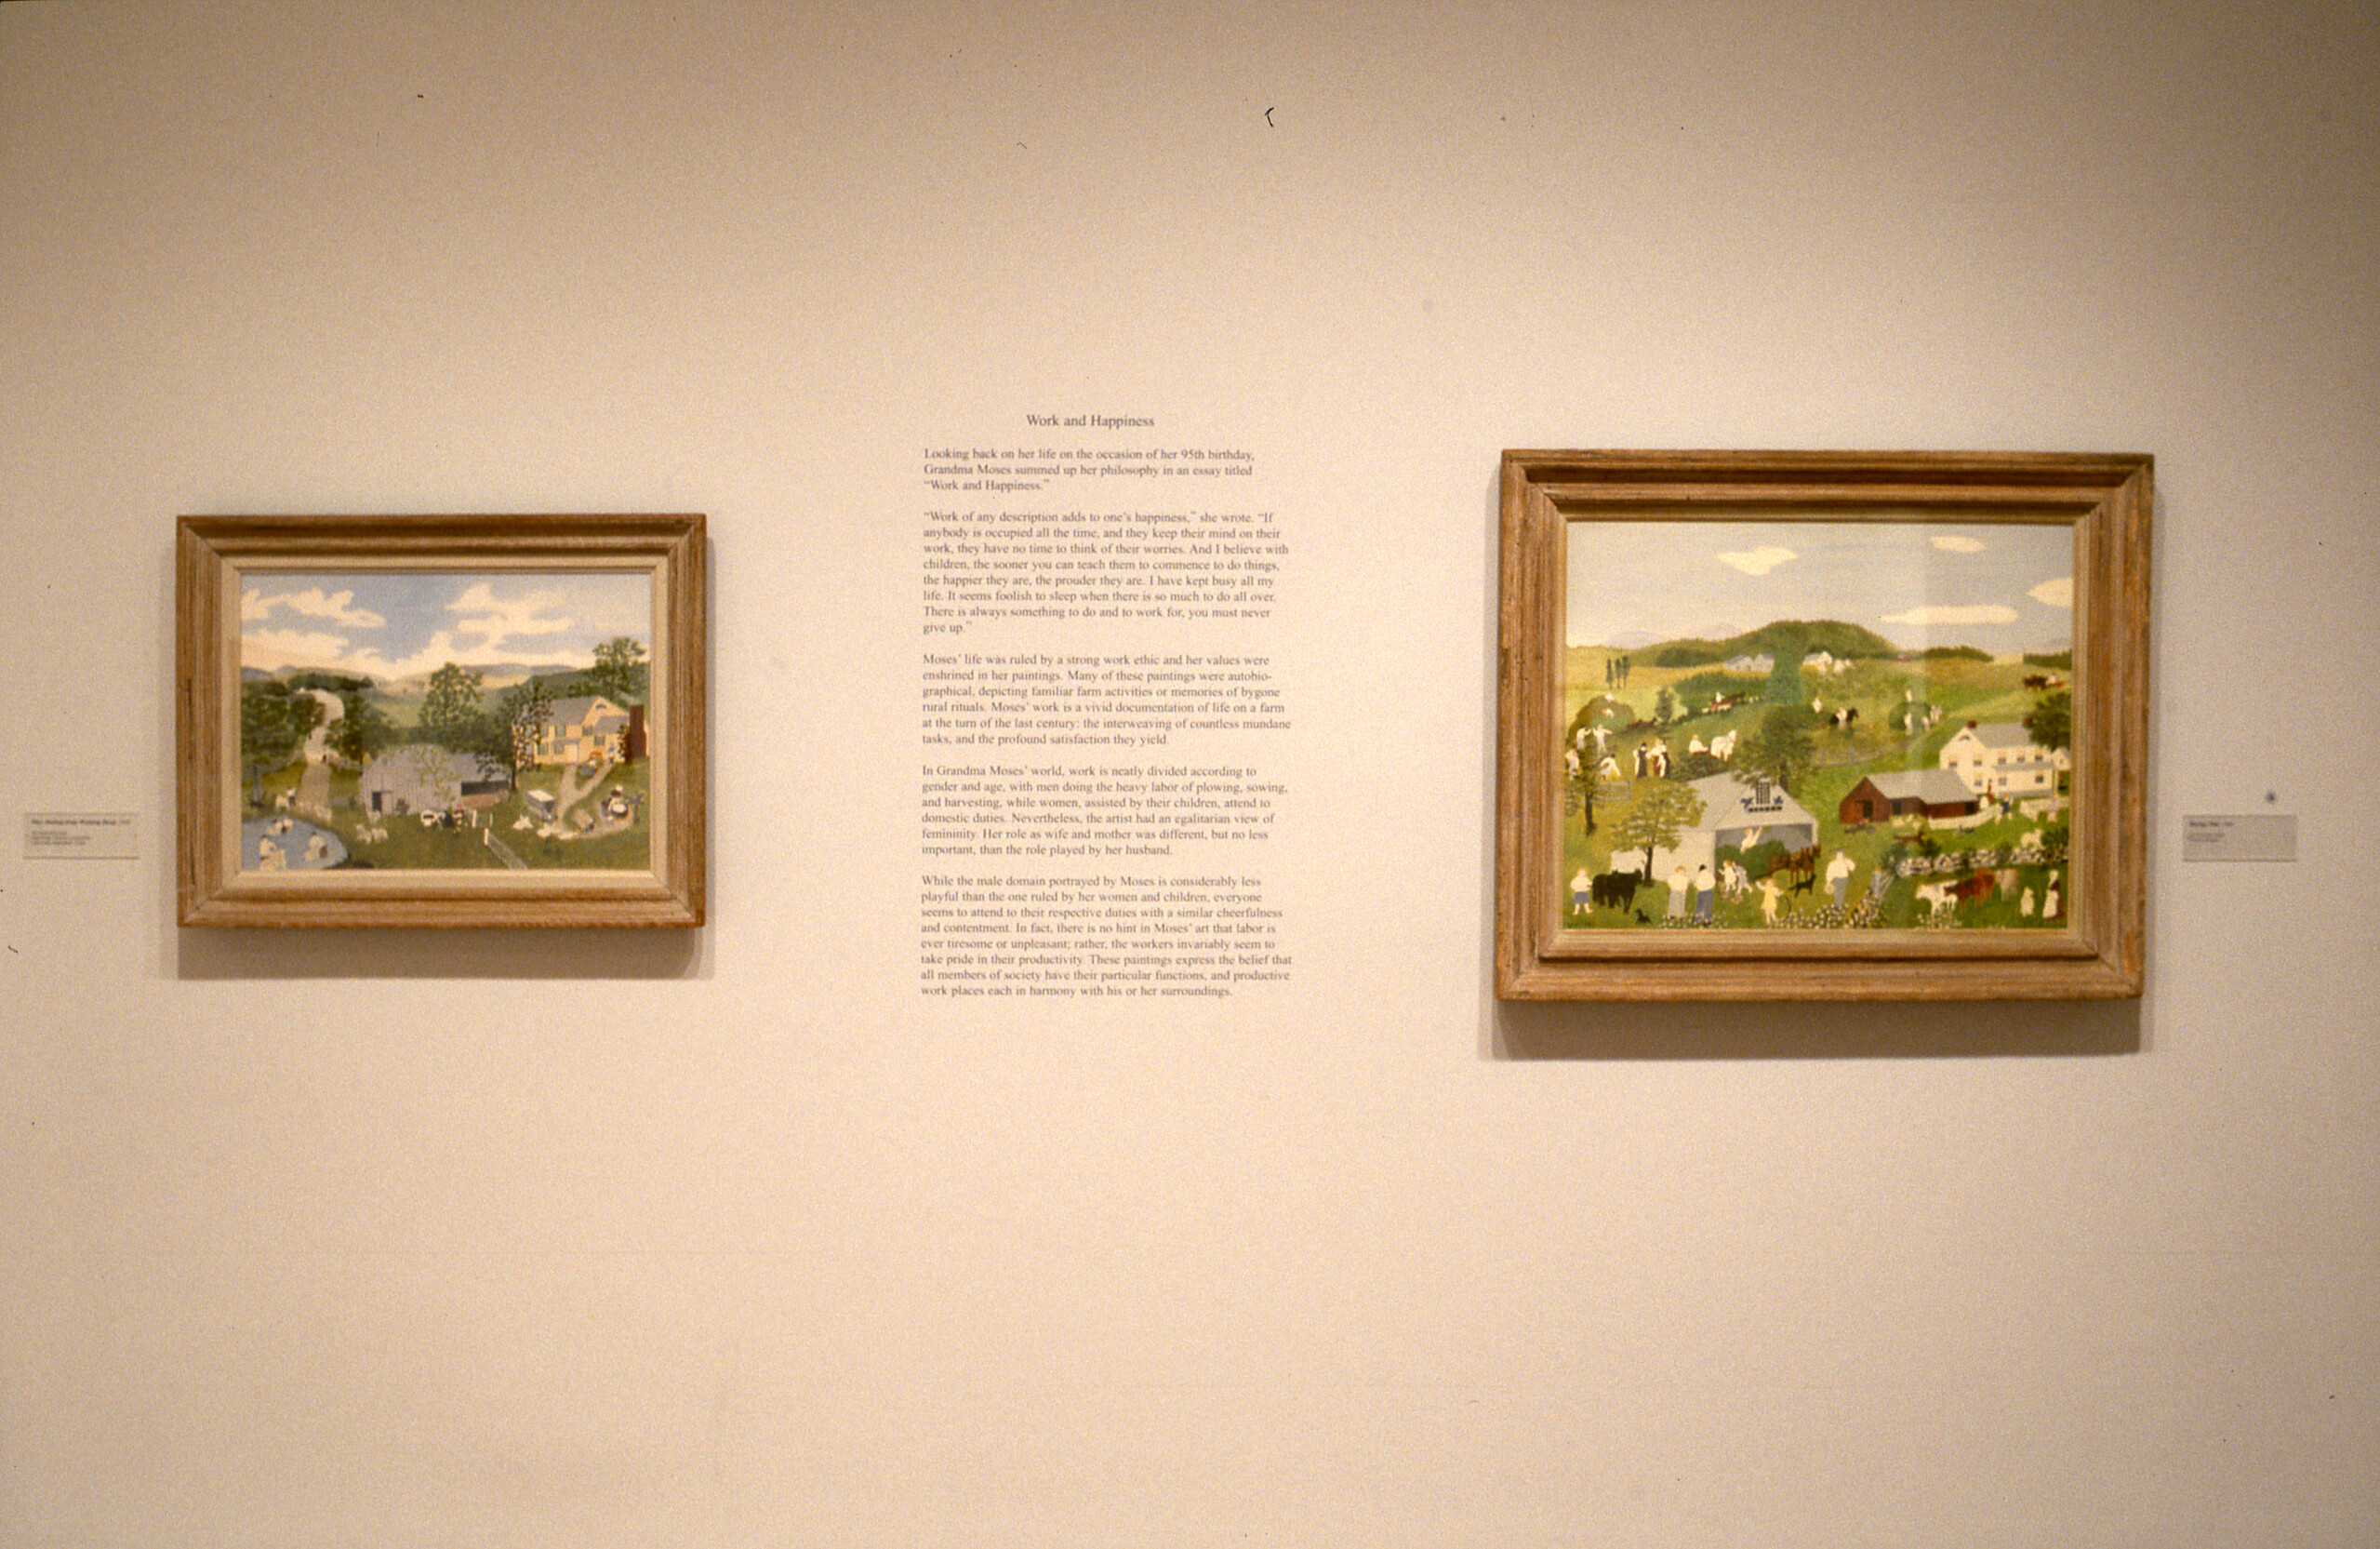 Two paintings of landscapes hang next to each other on a white wall. In between them is an exhibition text. The paintings depict farms on lush, green meadows.